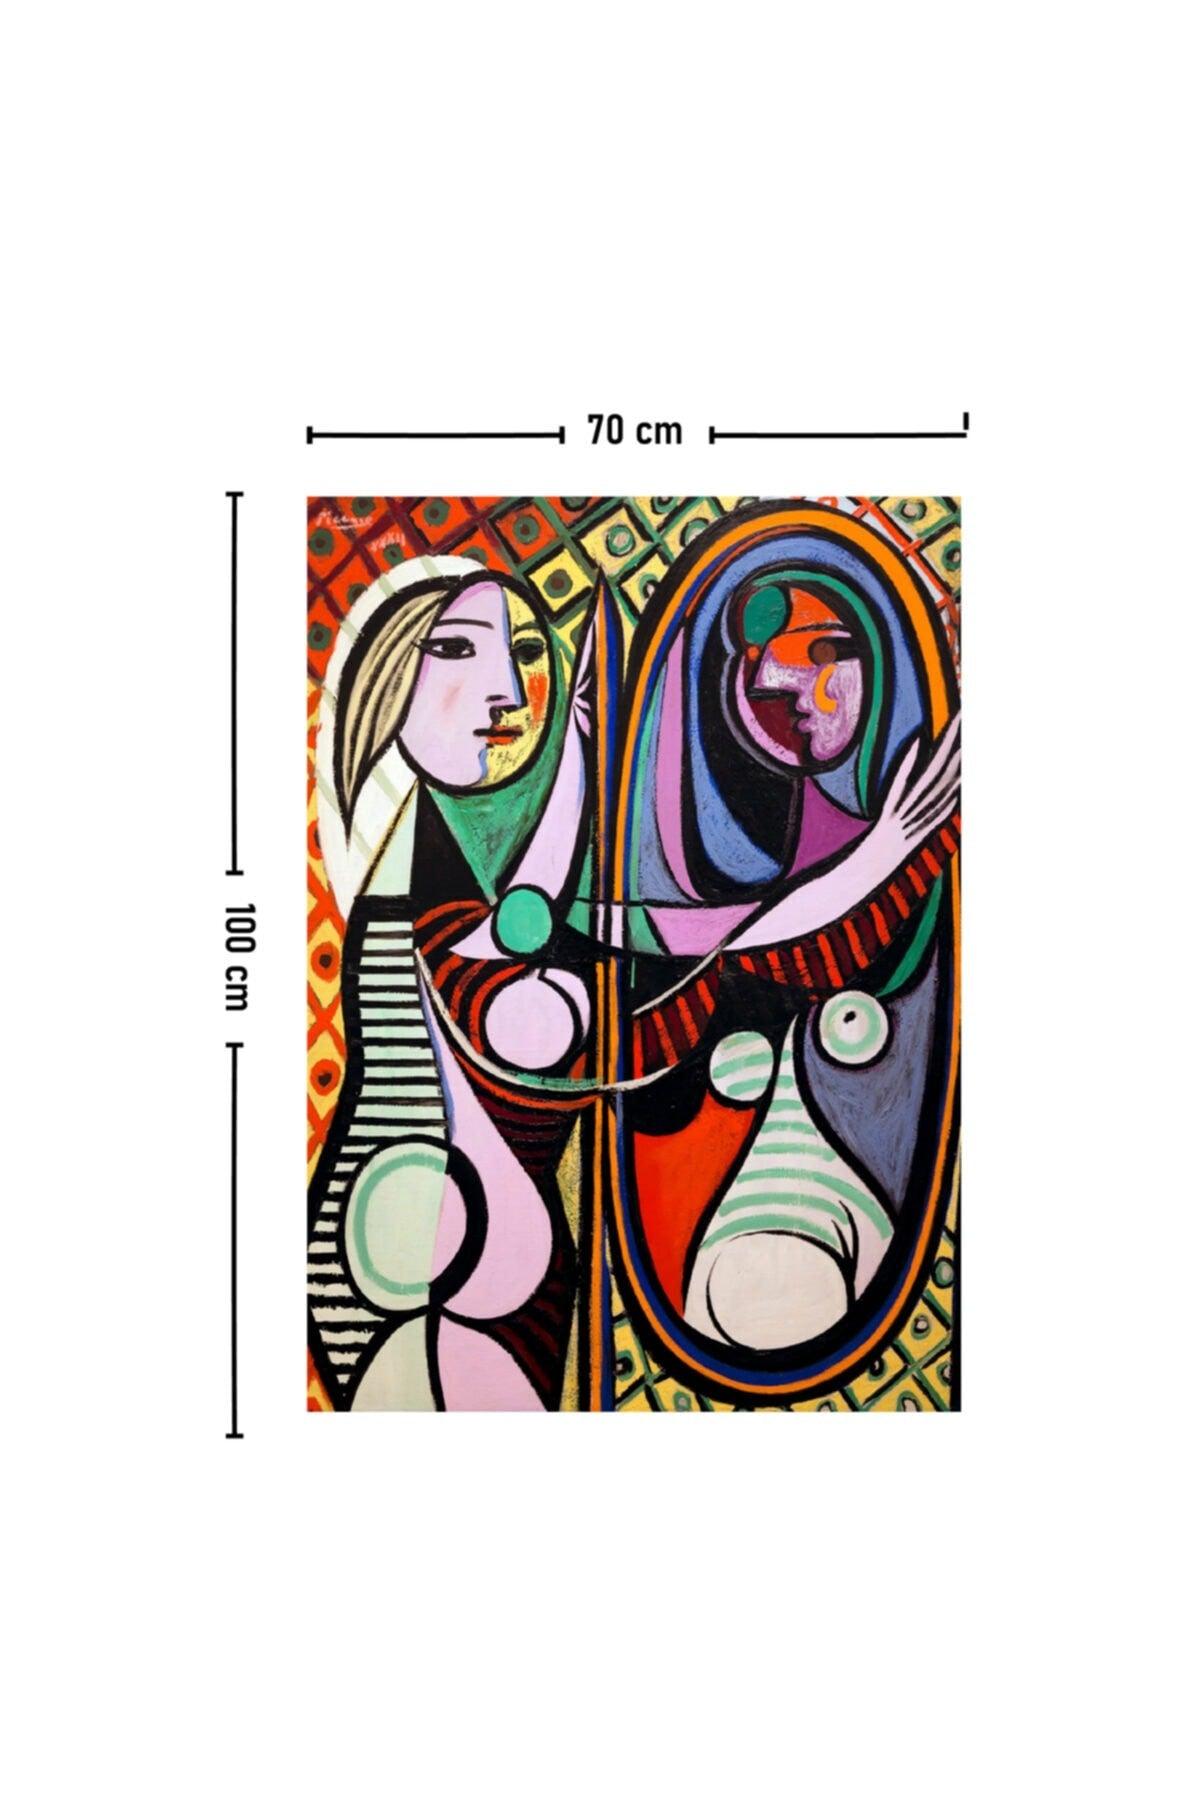 Pablo Picasso Girl in Front of the Mirror Wall Covering Carpet 140x100 Cm-70x100 Cm - Swordslife